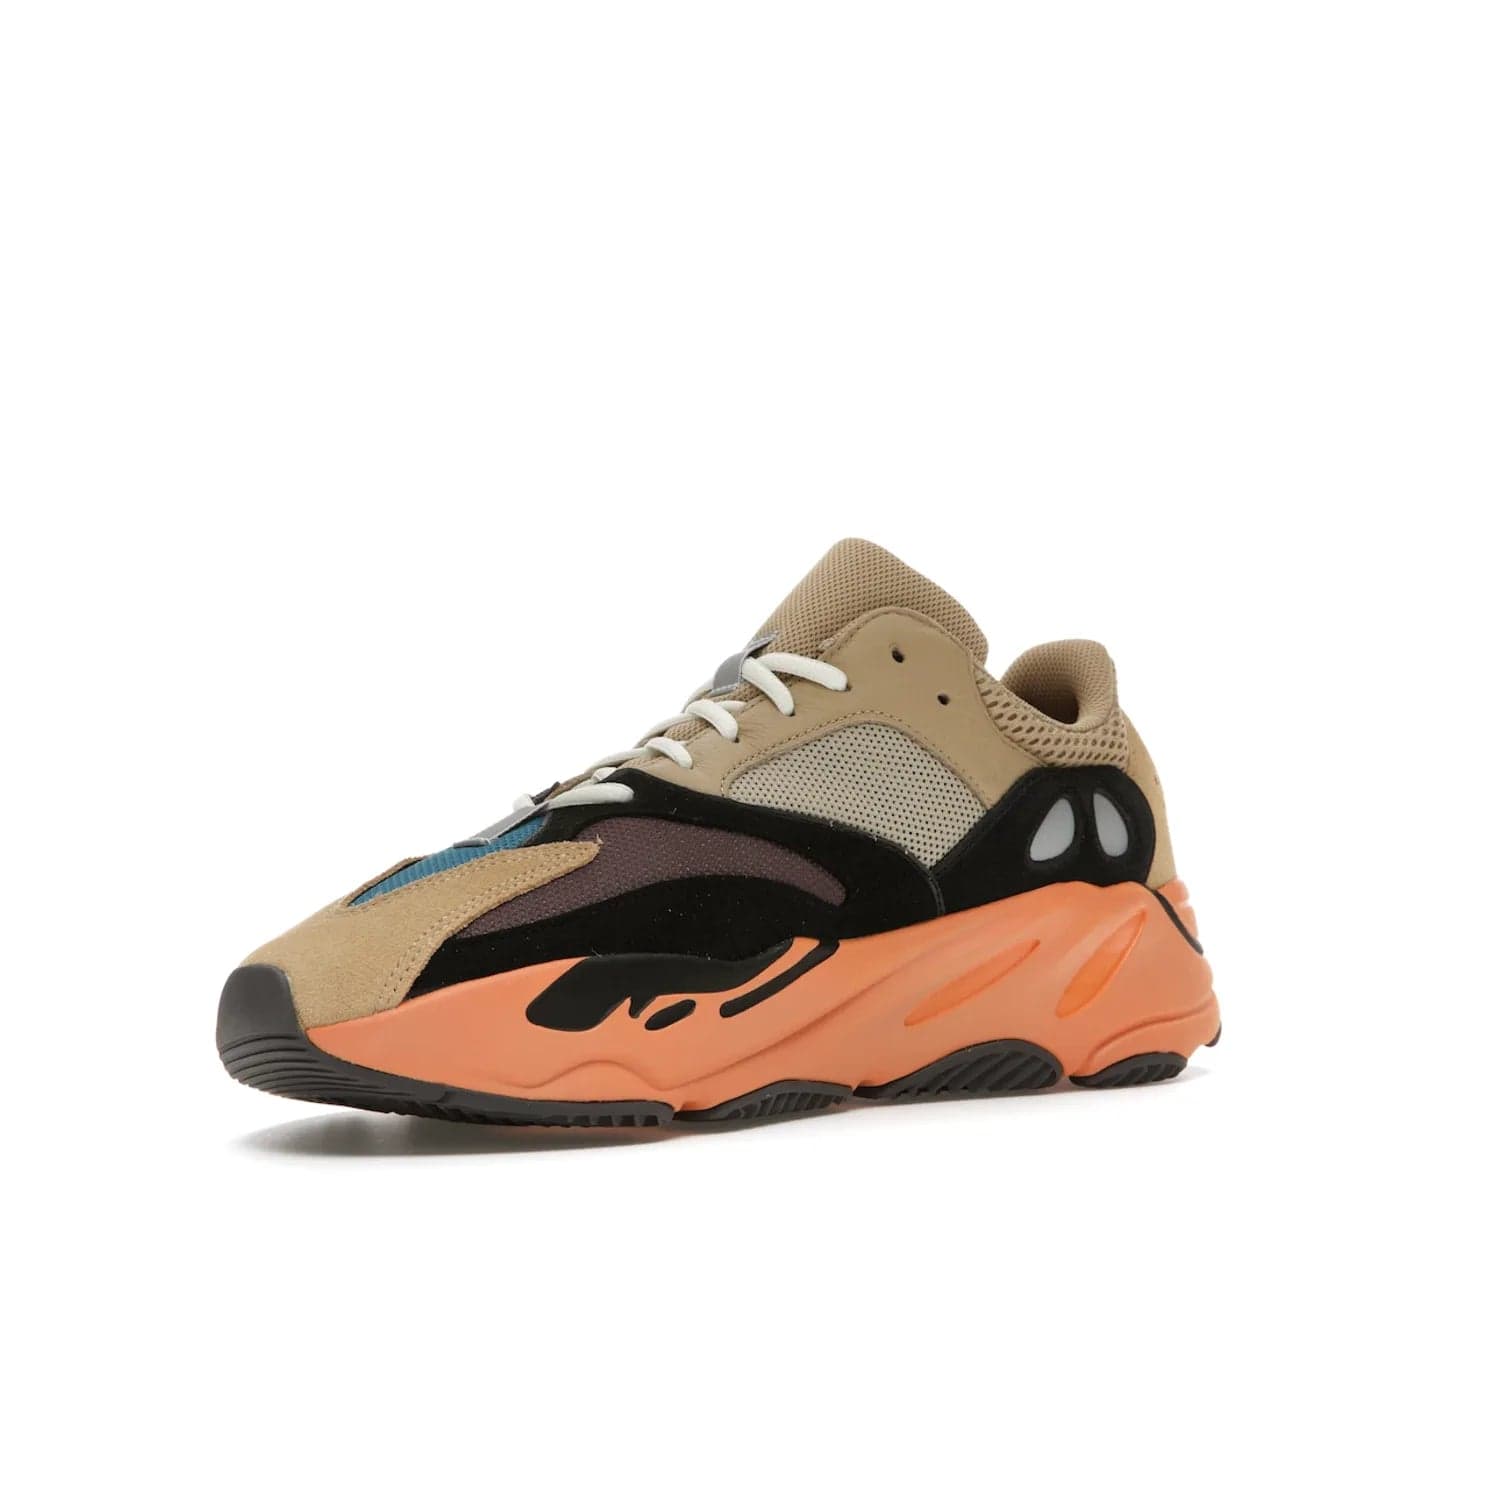 adidas Yeezy Boost 700 Enflame Amber - Image 15 - Only at www.BallersClubKickz.com - Adidas Yeezy Boost 700 Enflame Amber: Eye-catching design with pale yellow, brown, teal, and orange! Get yours in June 2021.